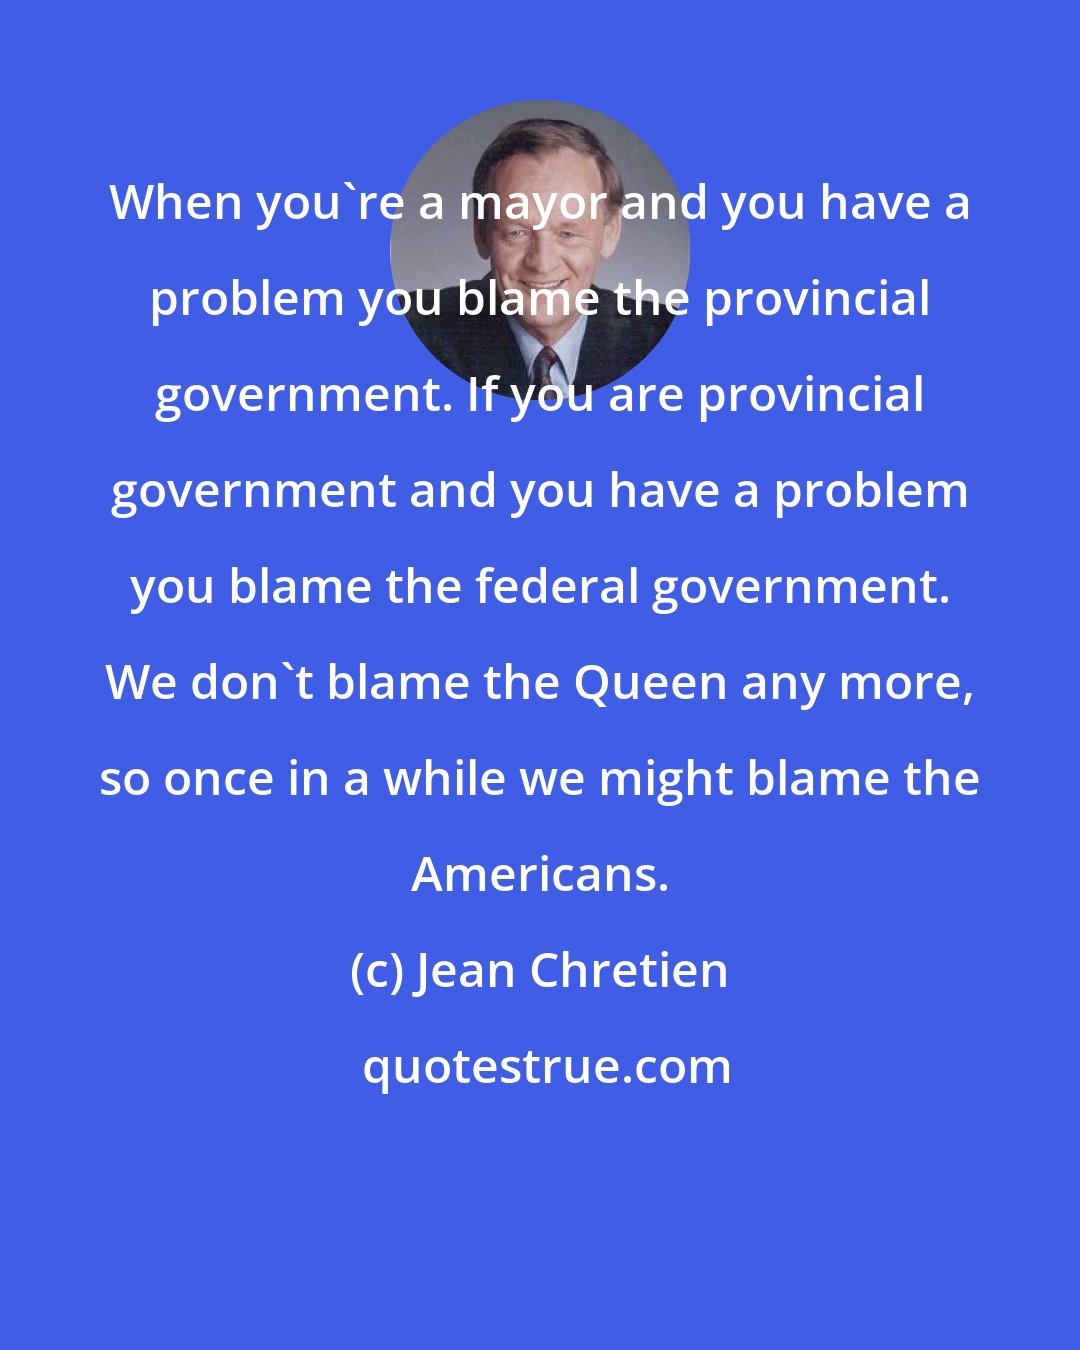 Jean Chretien: When you're a mayor and you have a problem you blame the provincial government. If you are provincial government and you have a problem you blame the federal government. We don't blame the Queen any more, so once in a while we might blame the Americans.